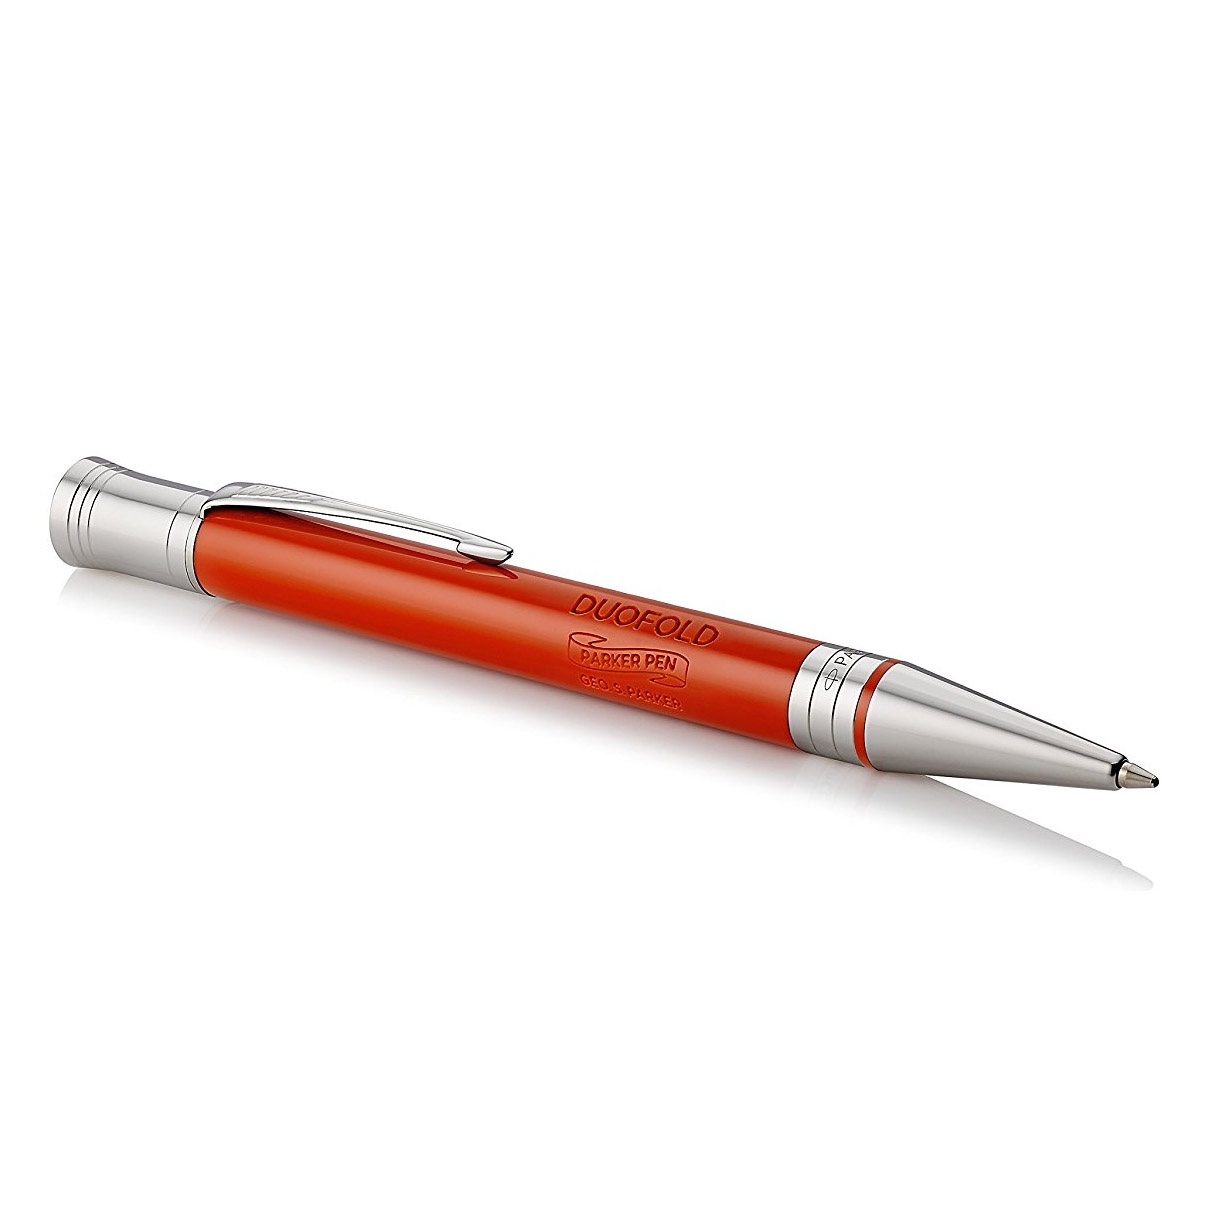 Duofold Big Red Vintage Ballpoint in the group Pens / Fine Writing / Gift Pens at Pen Store (104807)